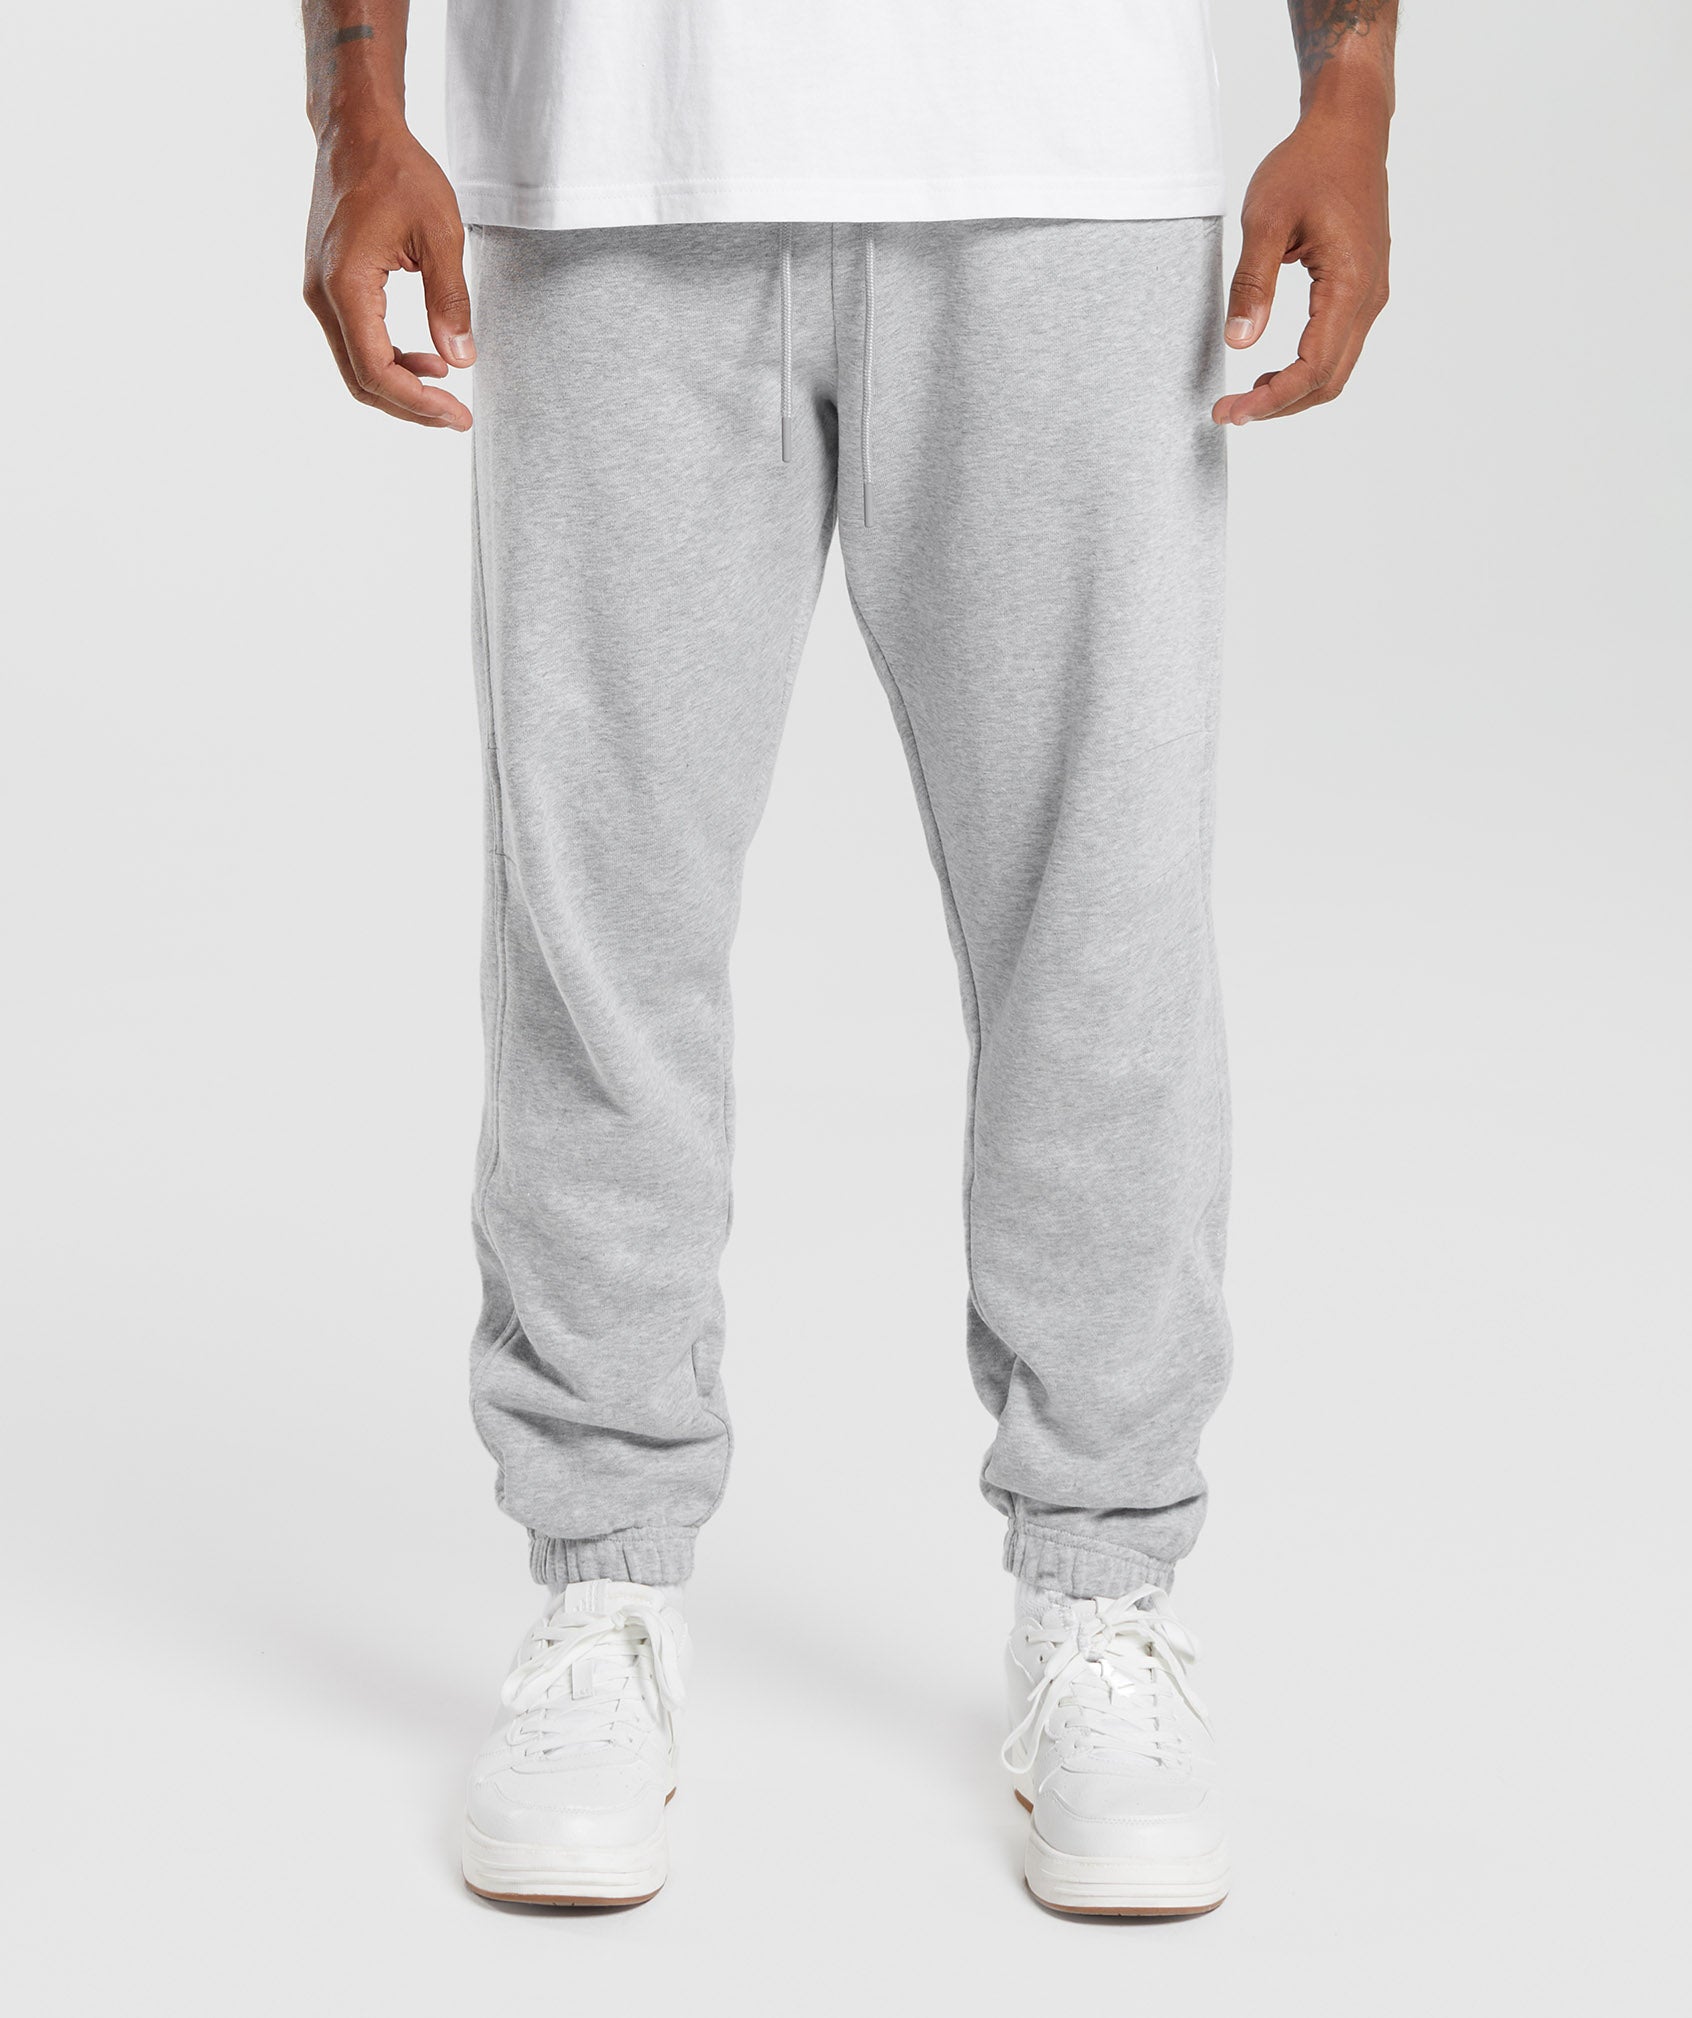 Rest Day Essentials Joggers in Light Grey Core Marl